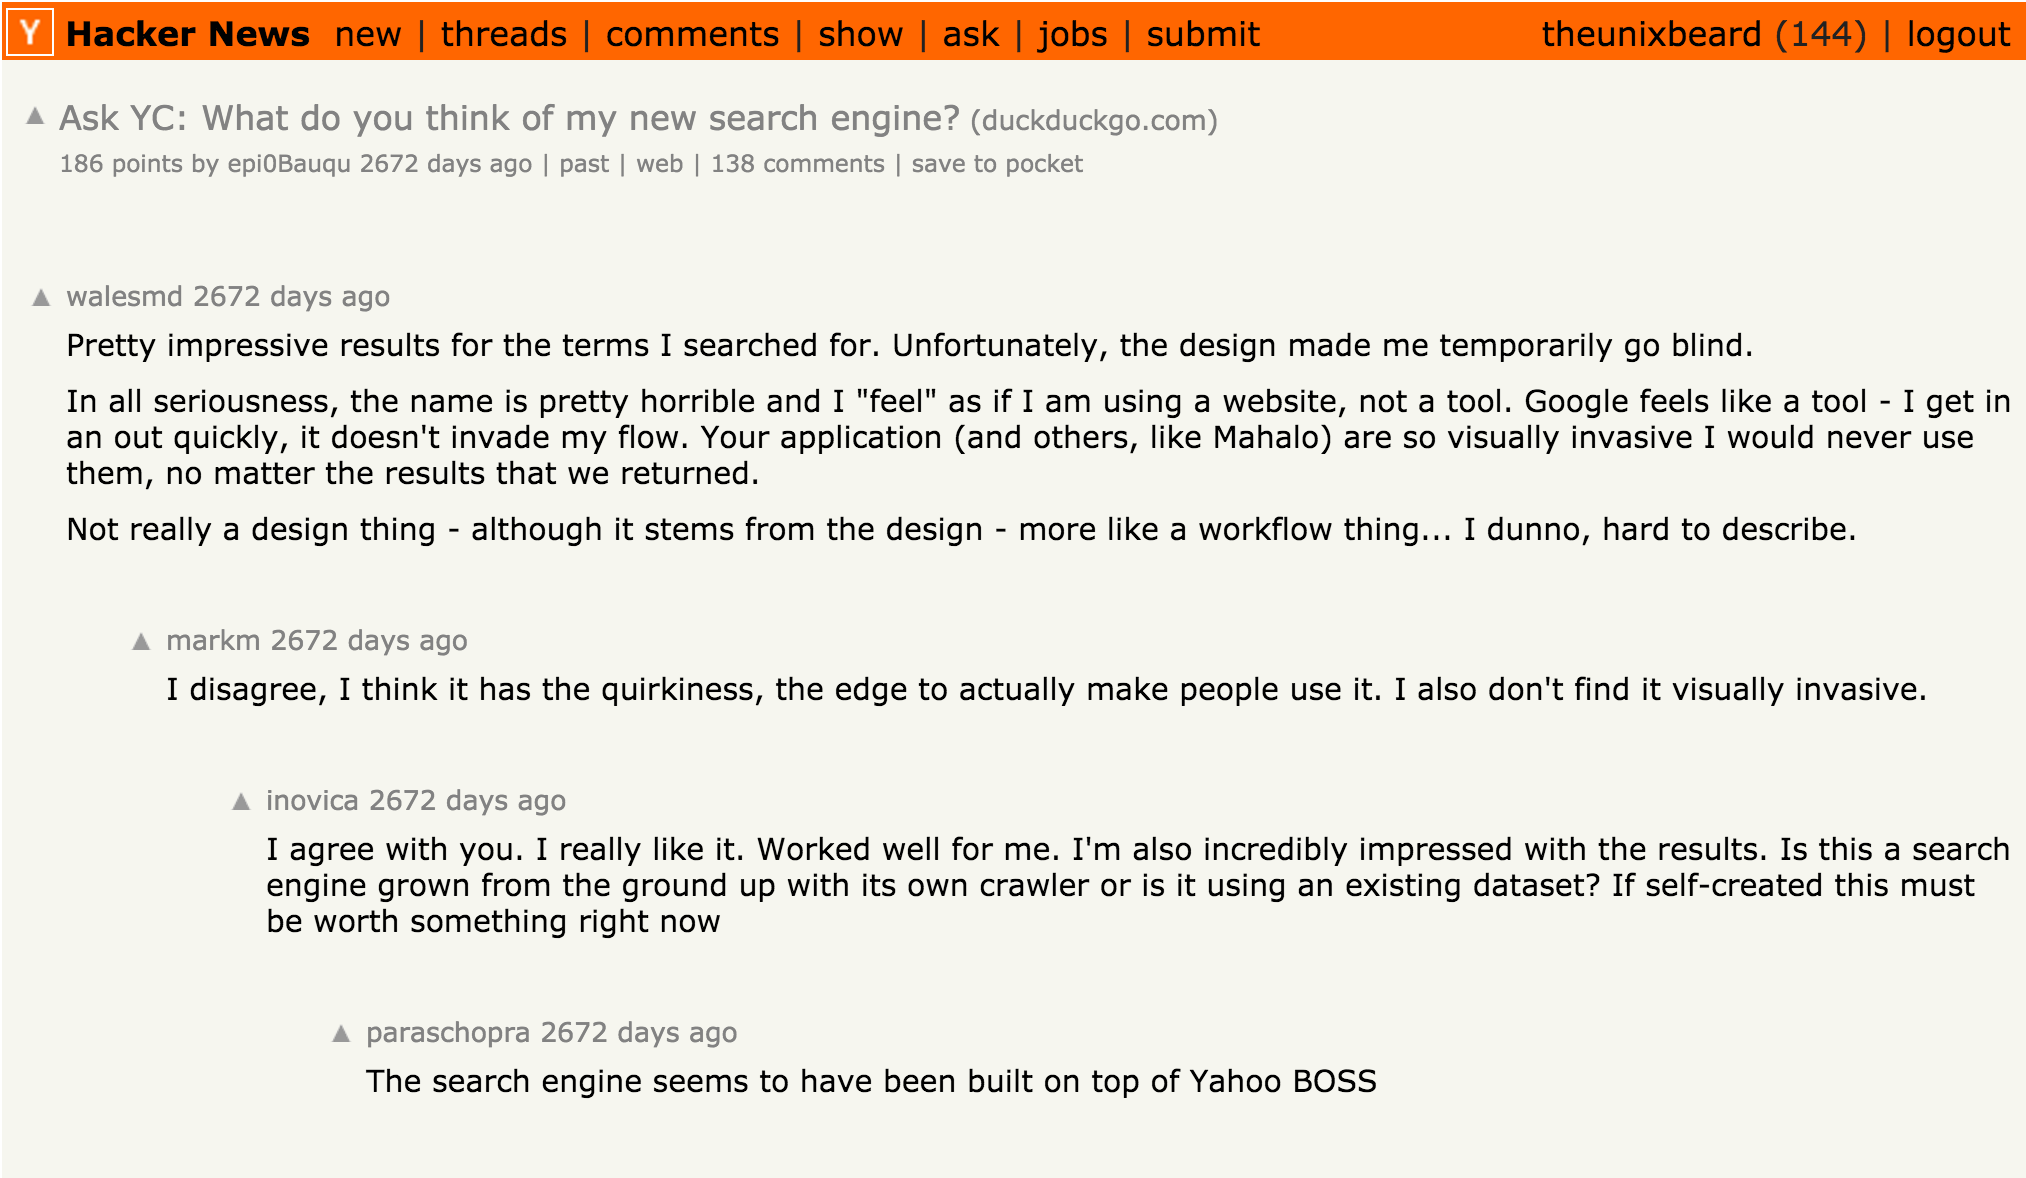 How to view a hacker news commenters oldest posts